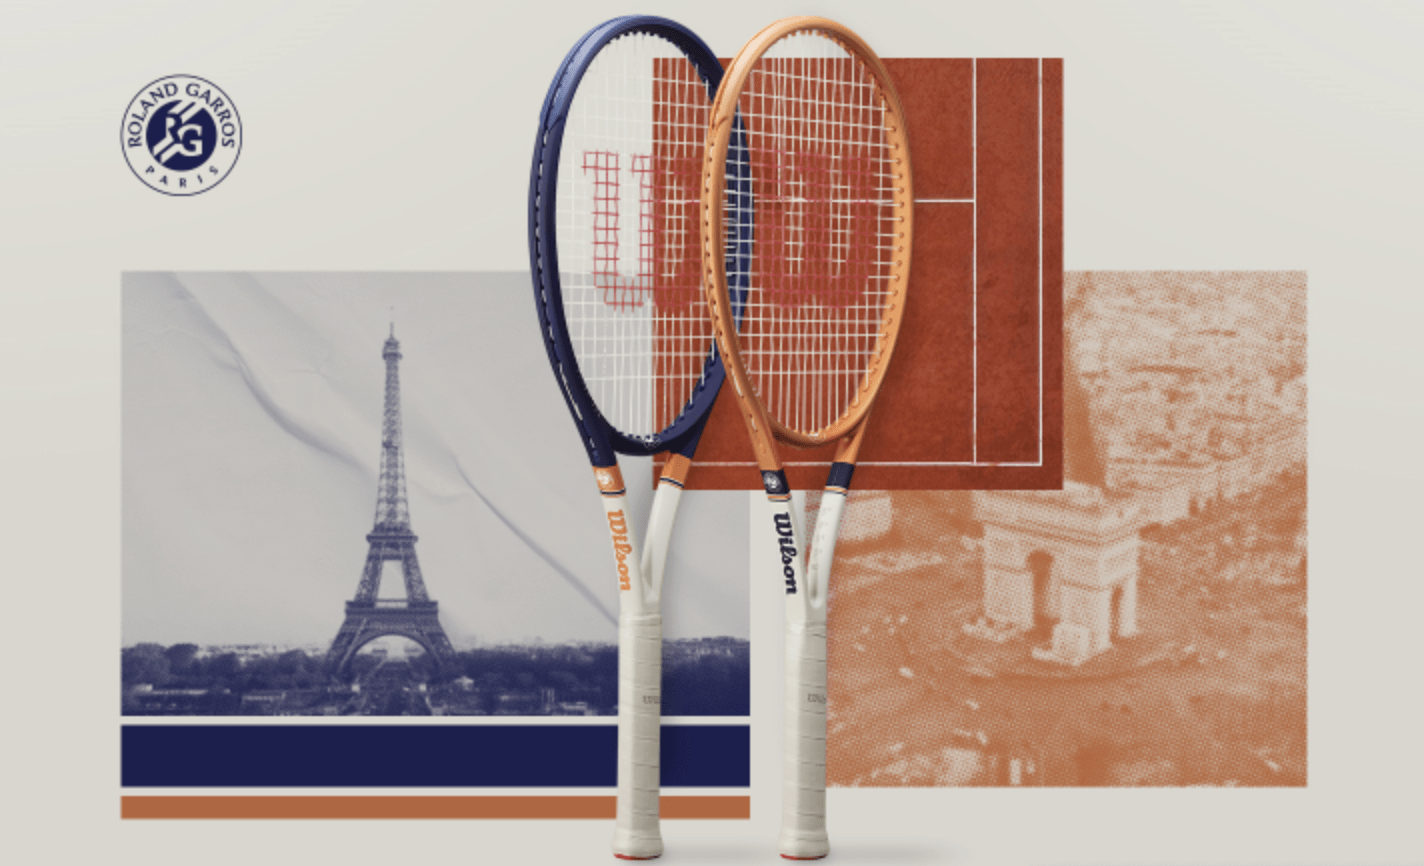 Gelijk Gronden Souvenir French Connection: Wilson Introduces Two Roland Garros-Inspired Tennis  Racquets, And We Want! | TENNIS LIFE